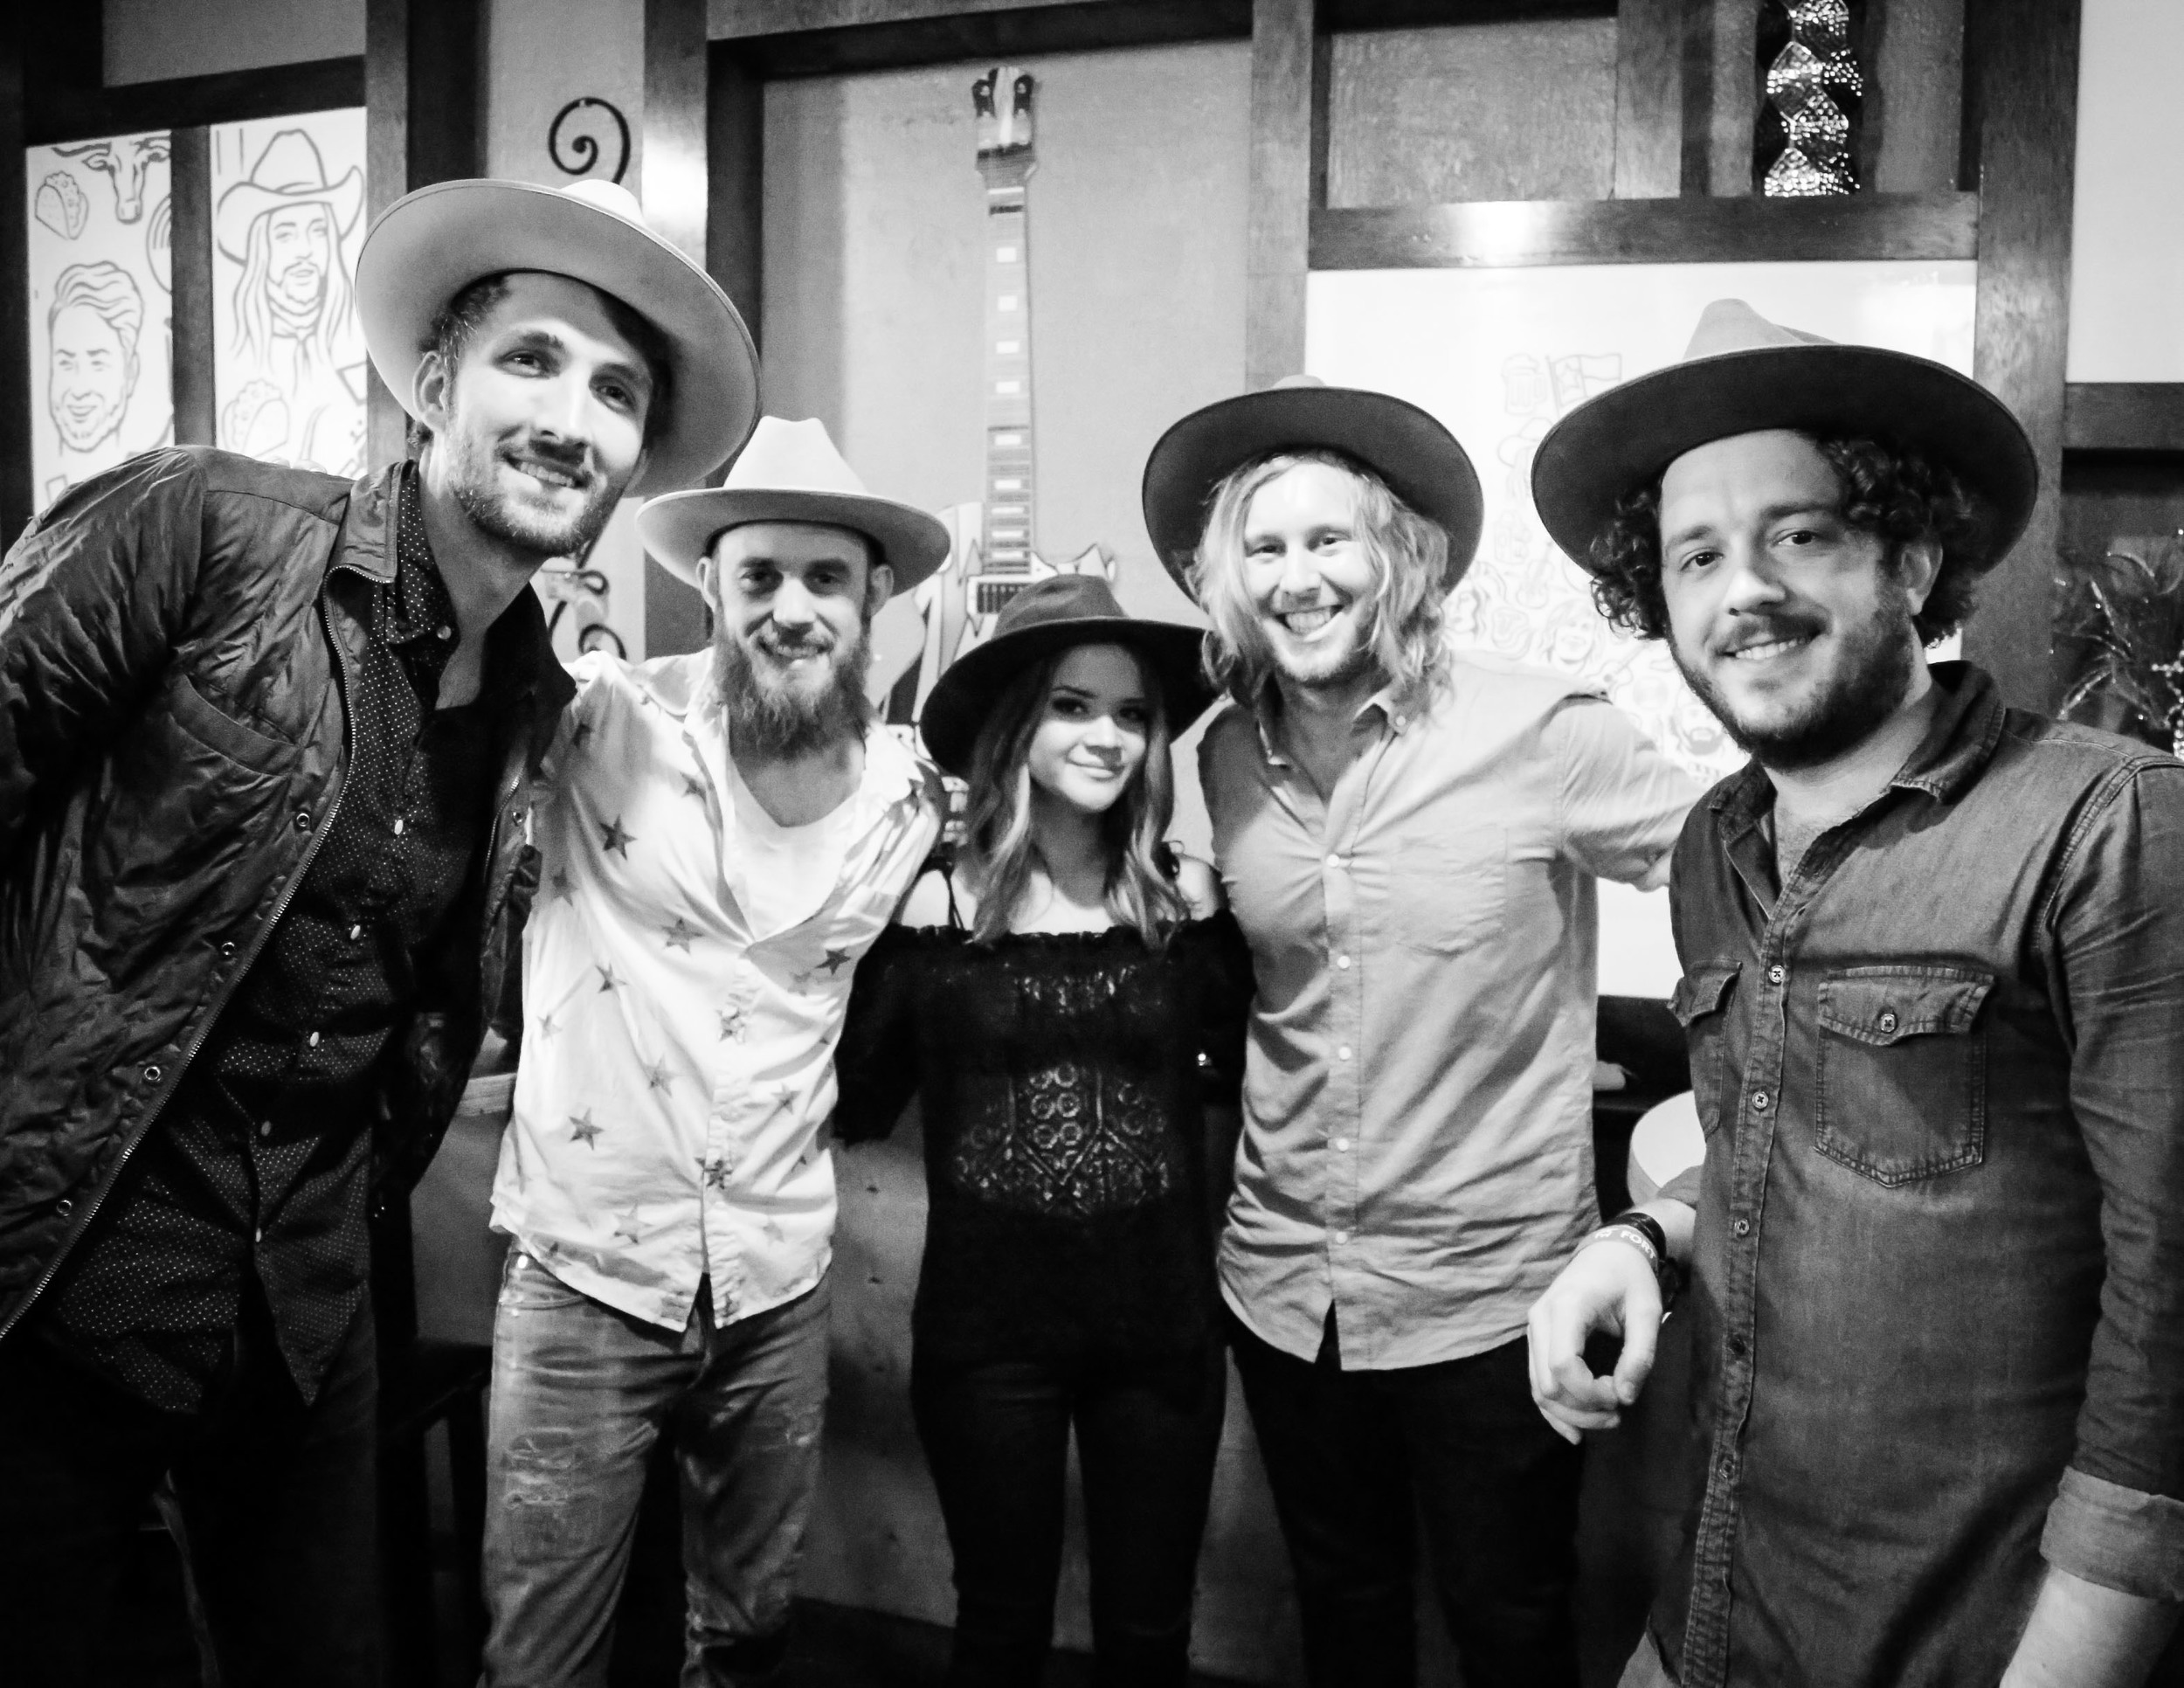  Fellow Fort Worthian &amp; country star Maren Morris at the Hear Fort Worth Showcase. Maren is now on the road with Keith Urban!    